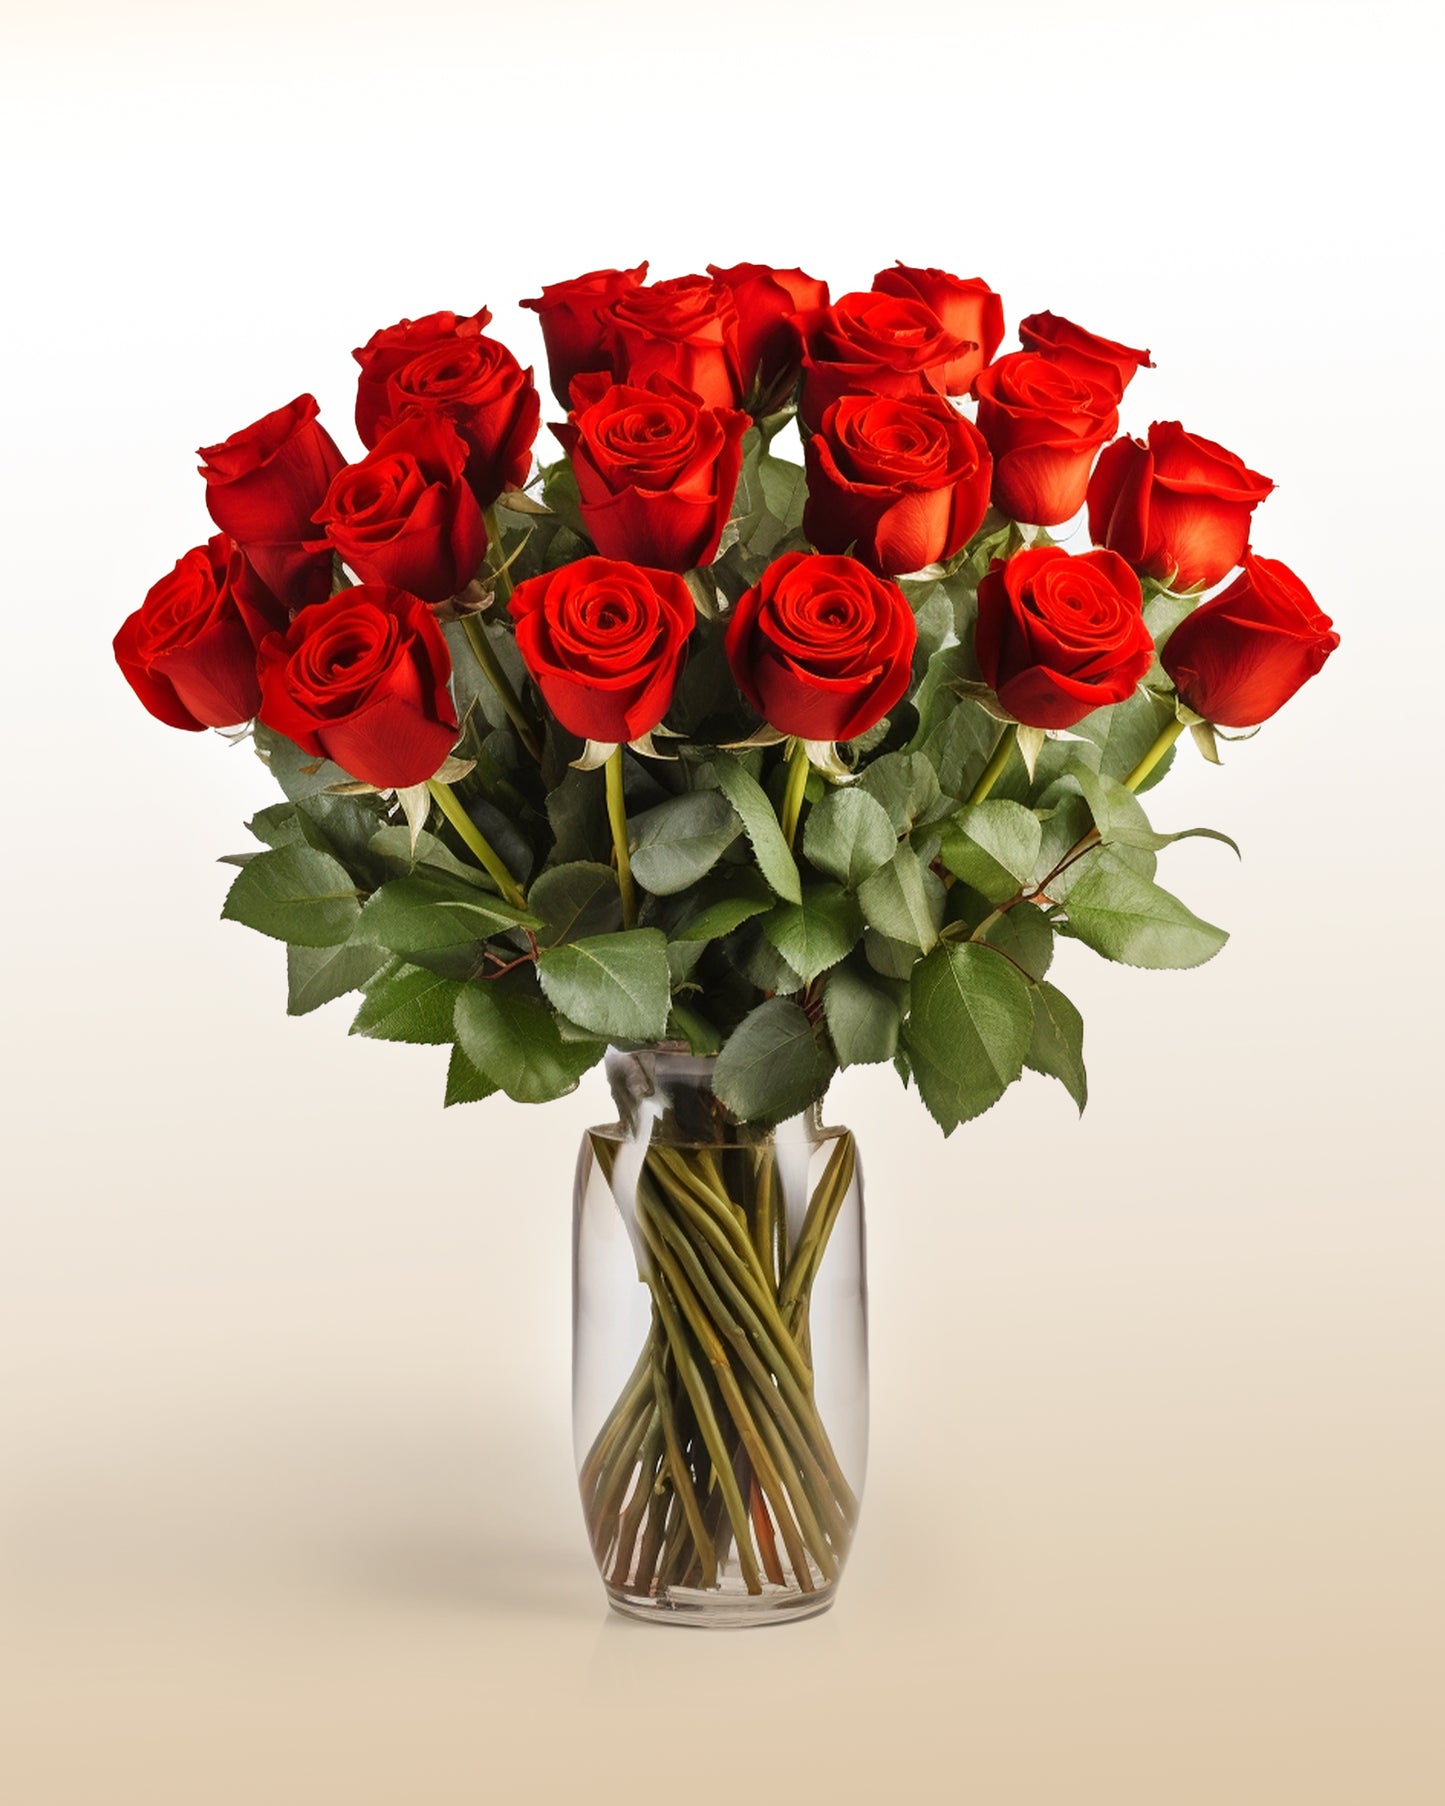 Majestic 24 Red Roses